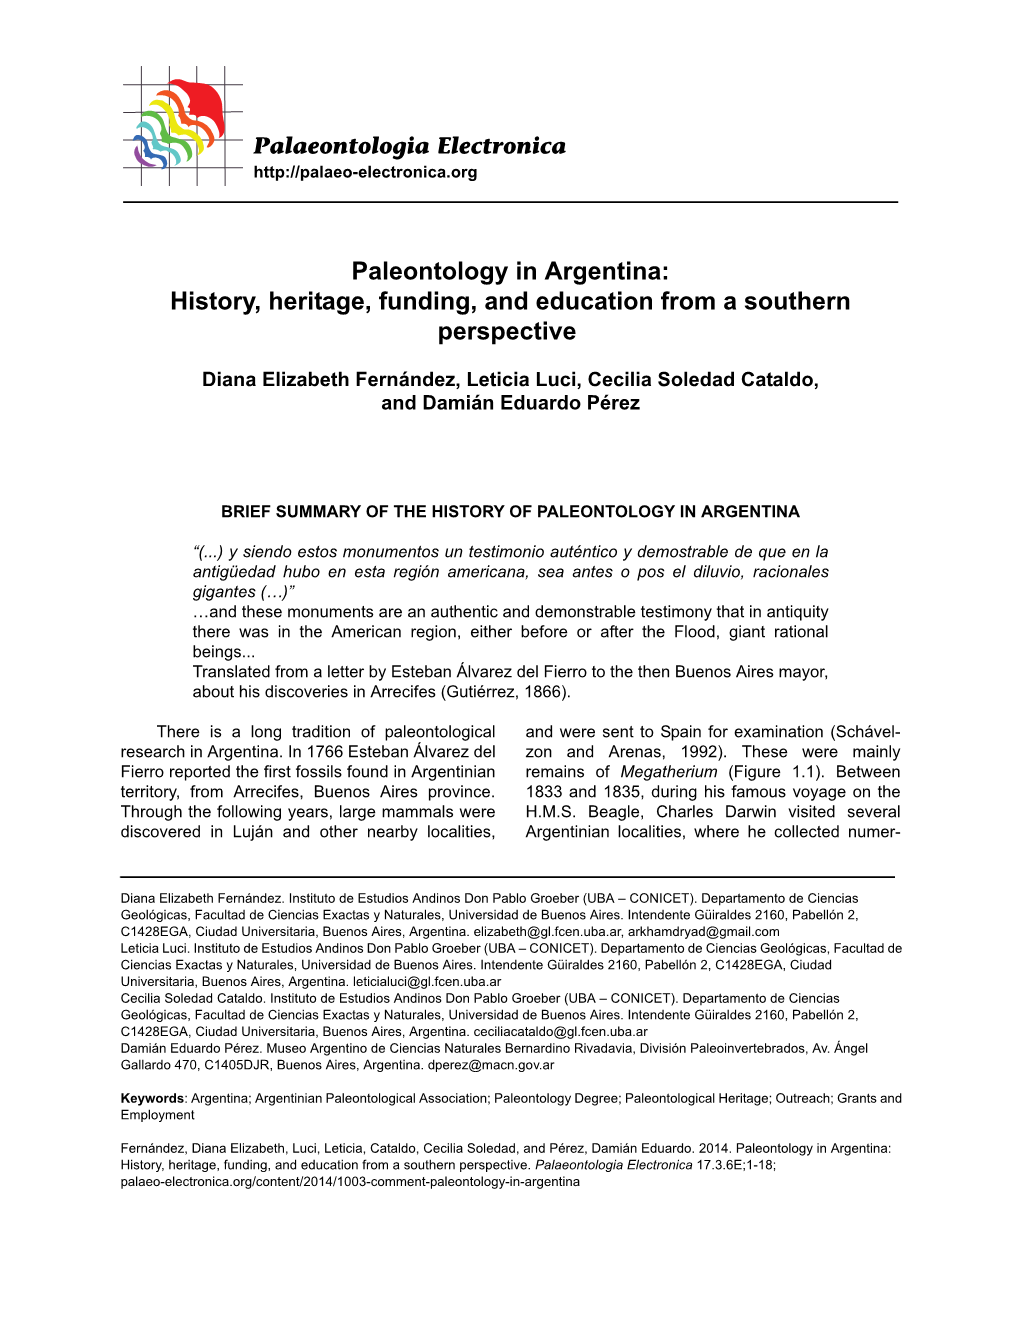 Paleontology in Argentina: History, Heritage, Funding, and Education from a Southern Perspective